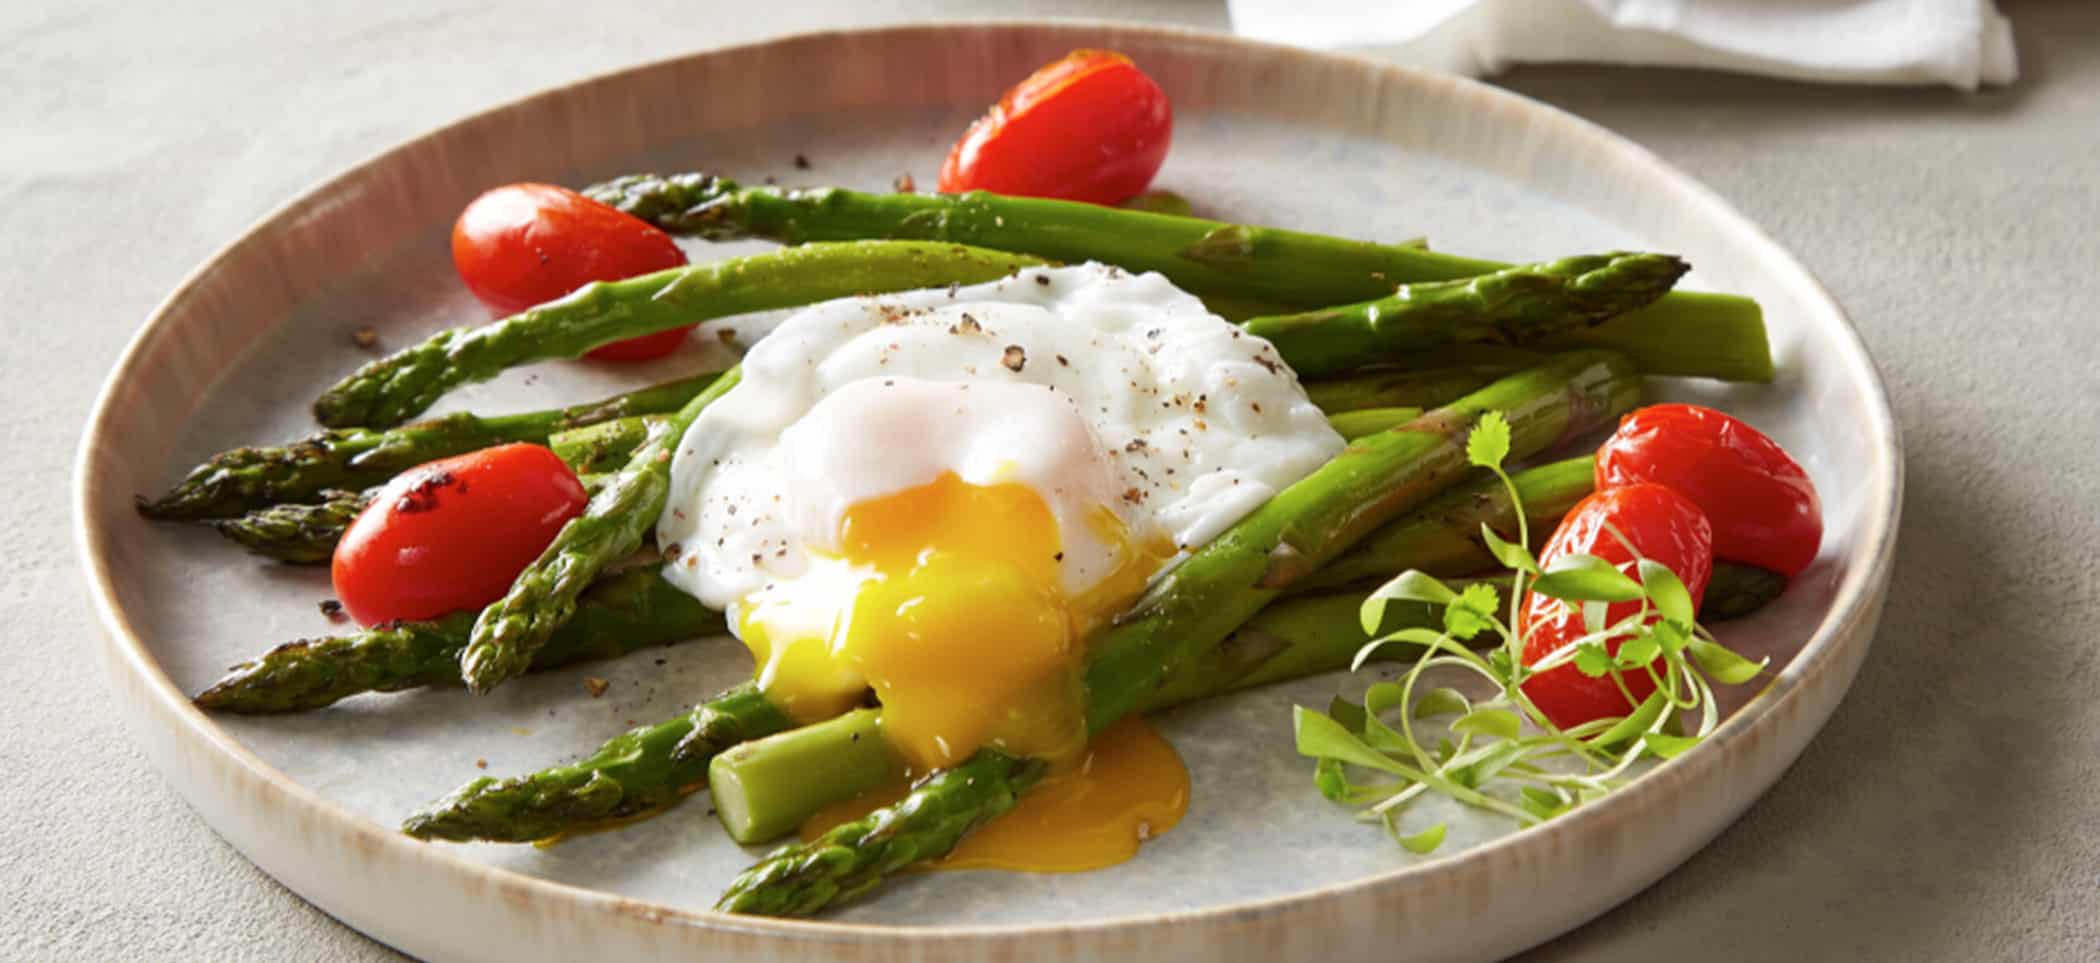 Poached Eggs with Asparagus and Tomatoes